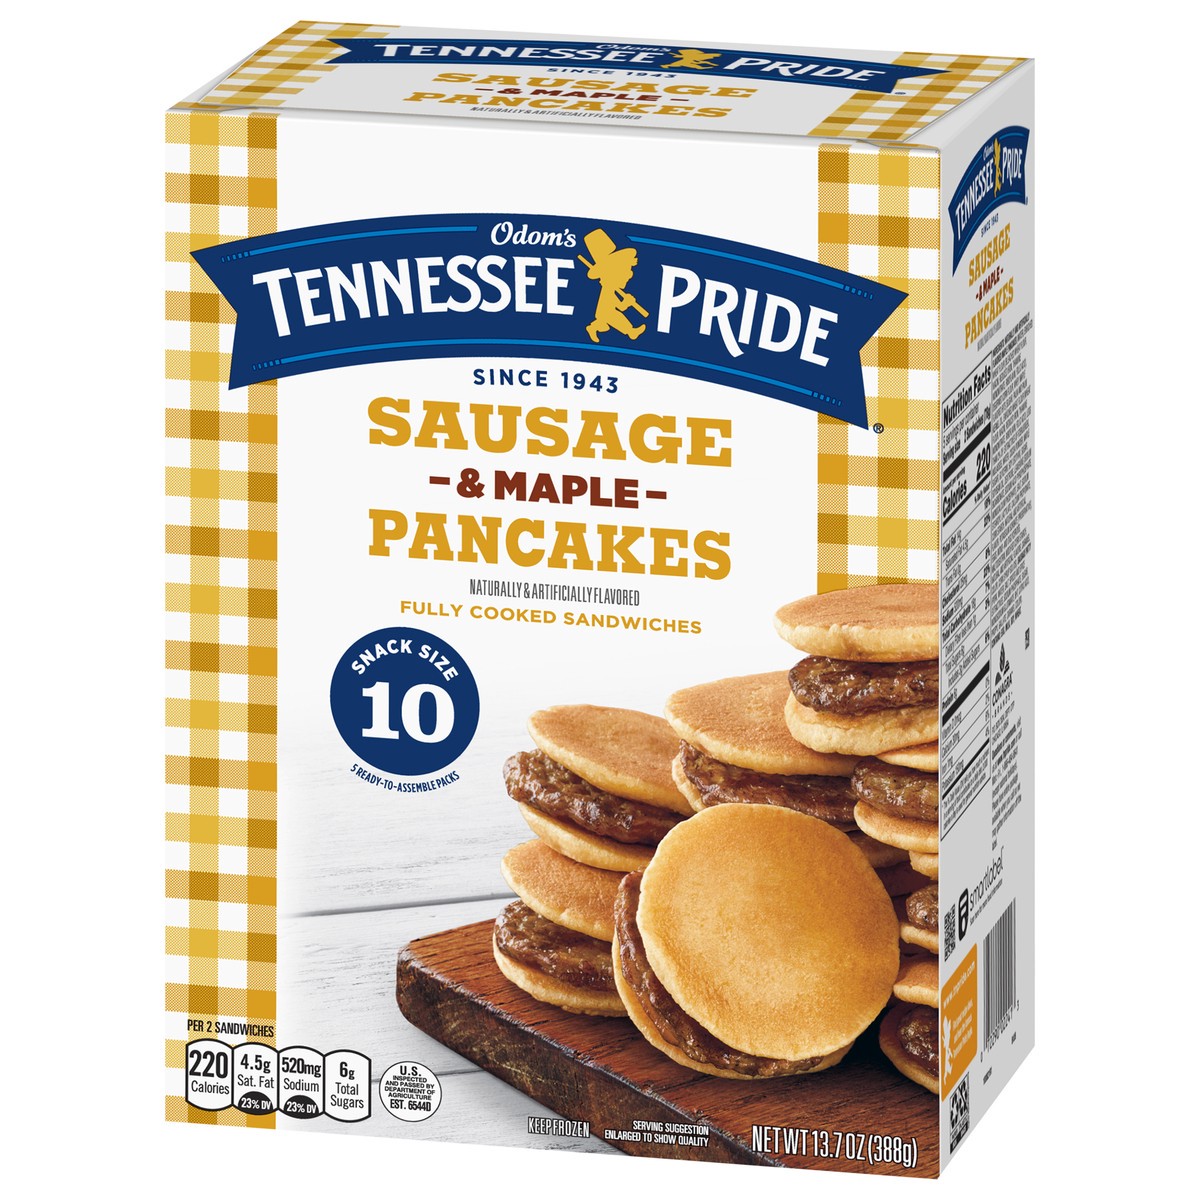 slide 3 of 11, Odom's Tennessee Pride Sausage & Maple Pancakes Snack Size 10 ea, 5 ct